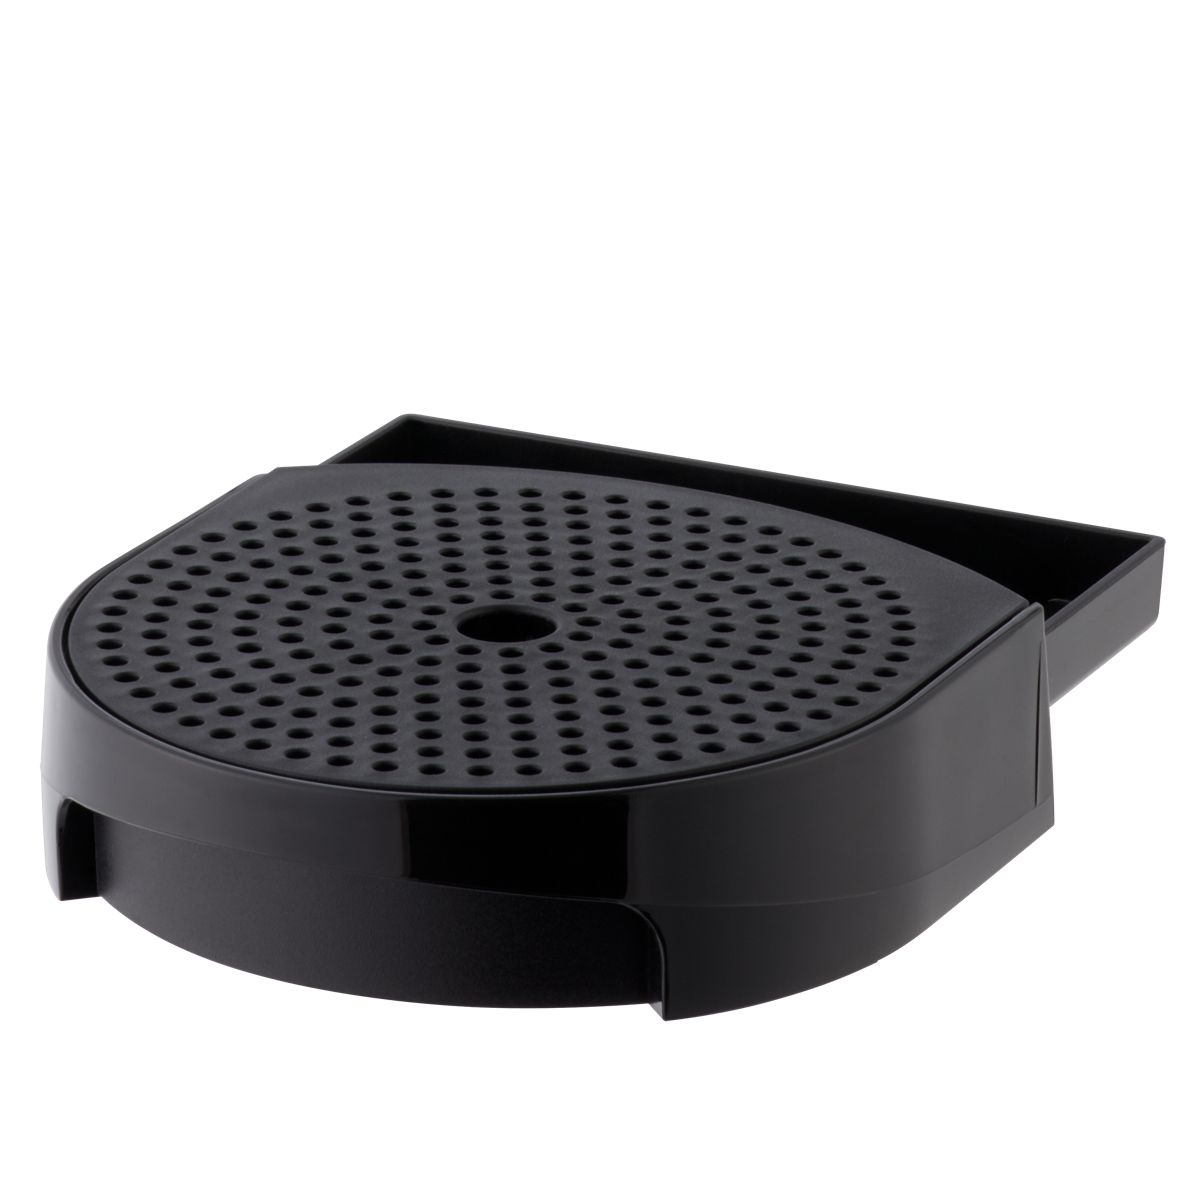 Keurig Replacement Drip Tray For K-Compact™ Coffee Maker - Black